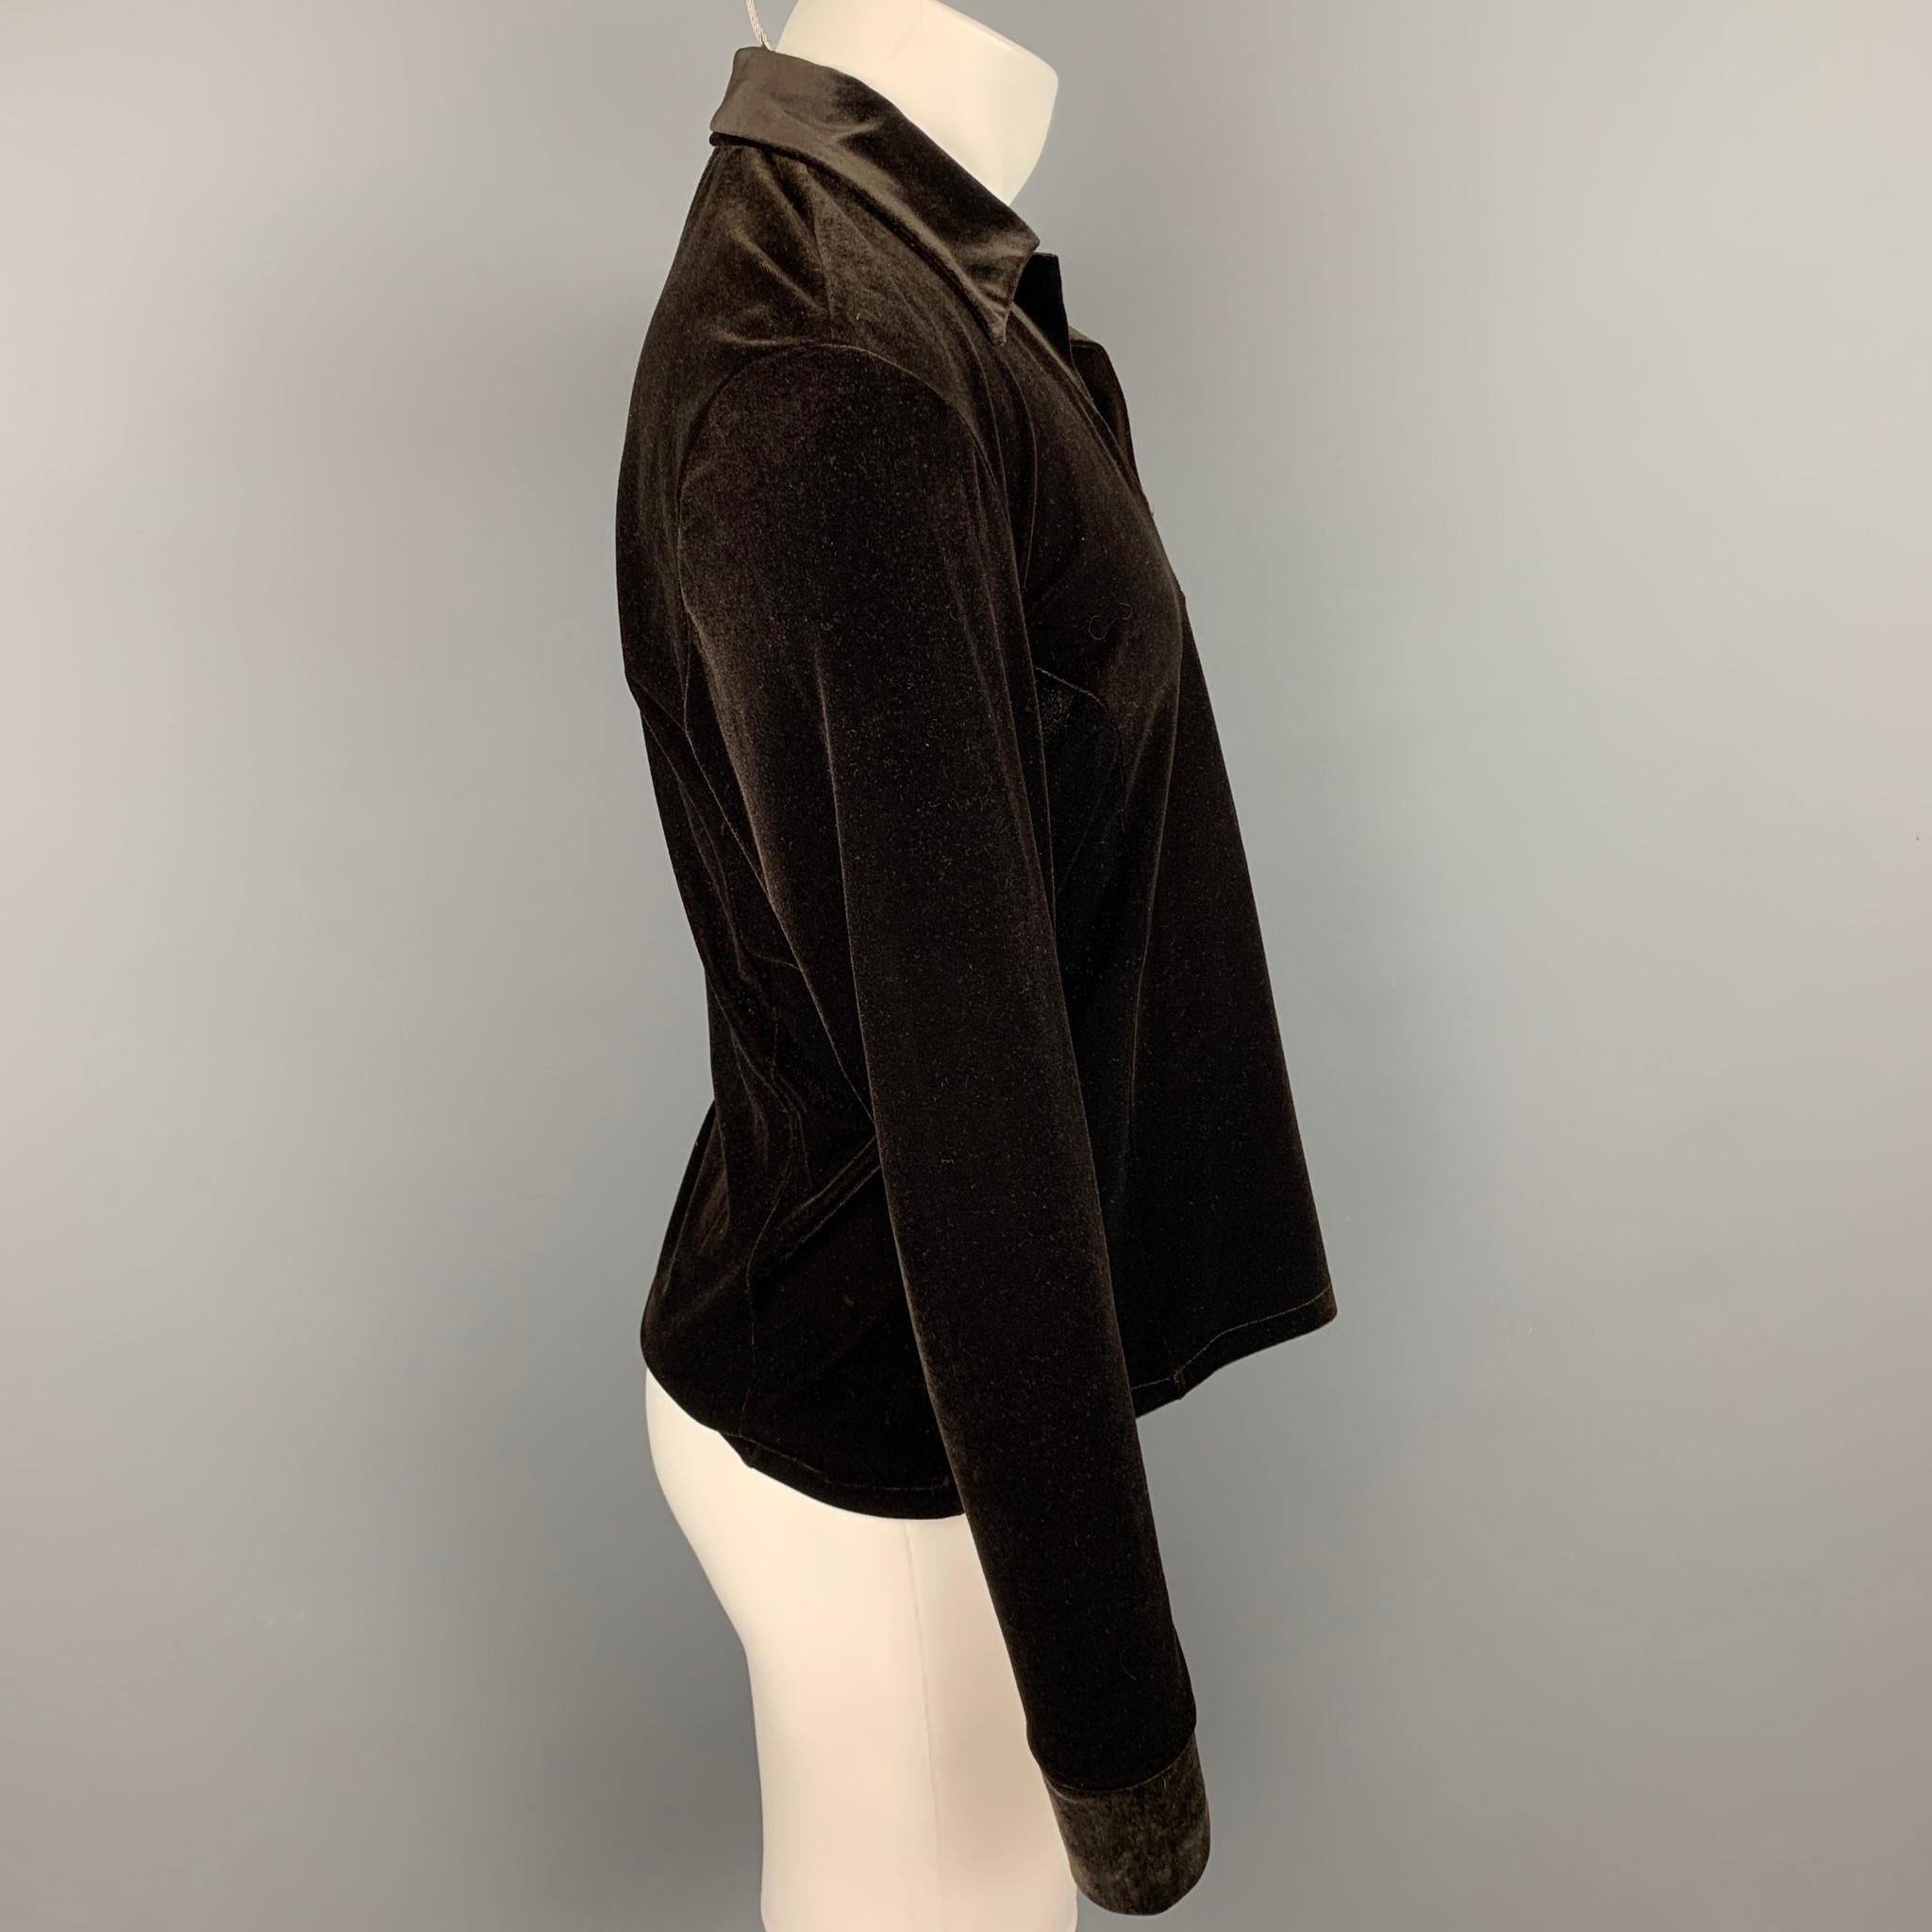 JOHN BARTLETT pullover comes in a brown velvet featuring a v-neck and a spread collar. Made in USA.

Good Pre-Owned Condition.
Marked: 2

Measurements:

Shoulder: 19.5 in.
Chest: 41 in.
Sleeve: 27.5 in.
Length: 25 in. 